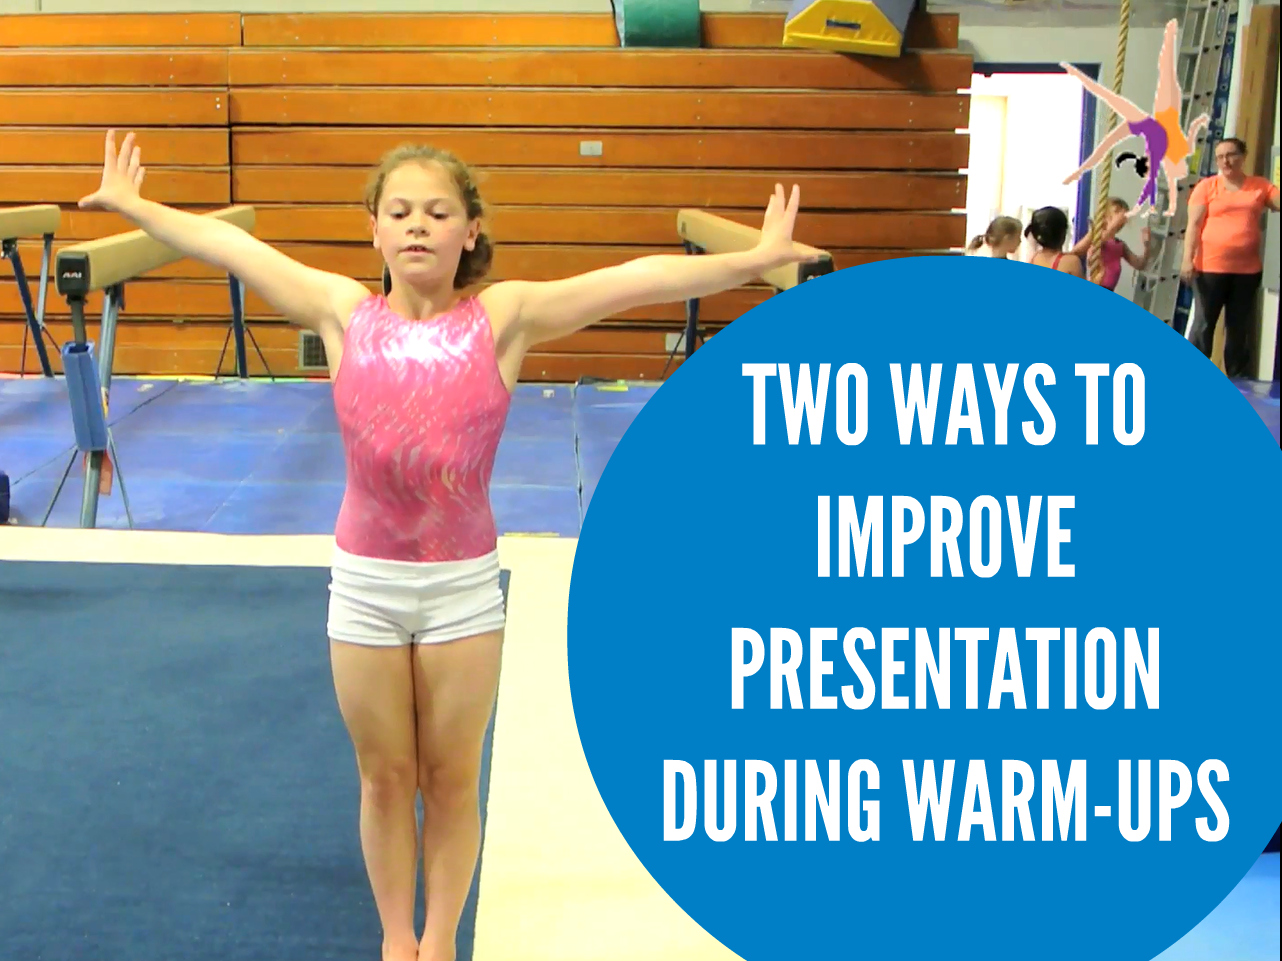 Two ways to improve presentation during warm-ups